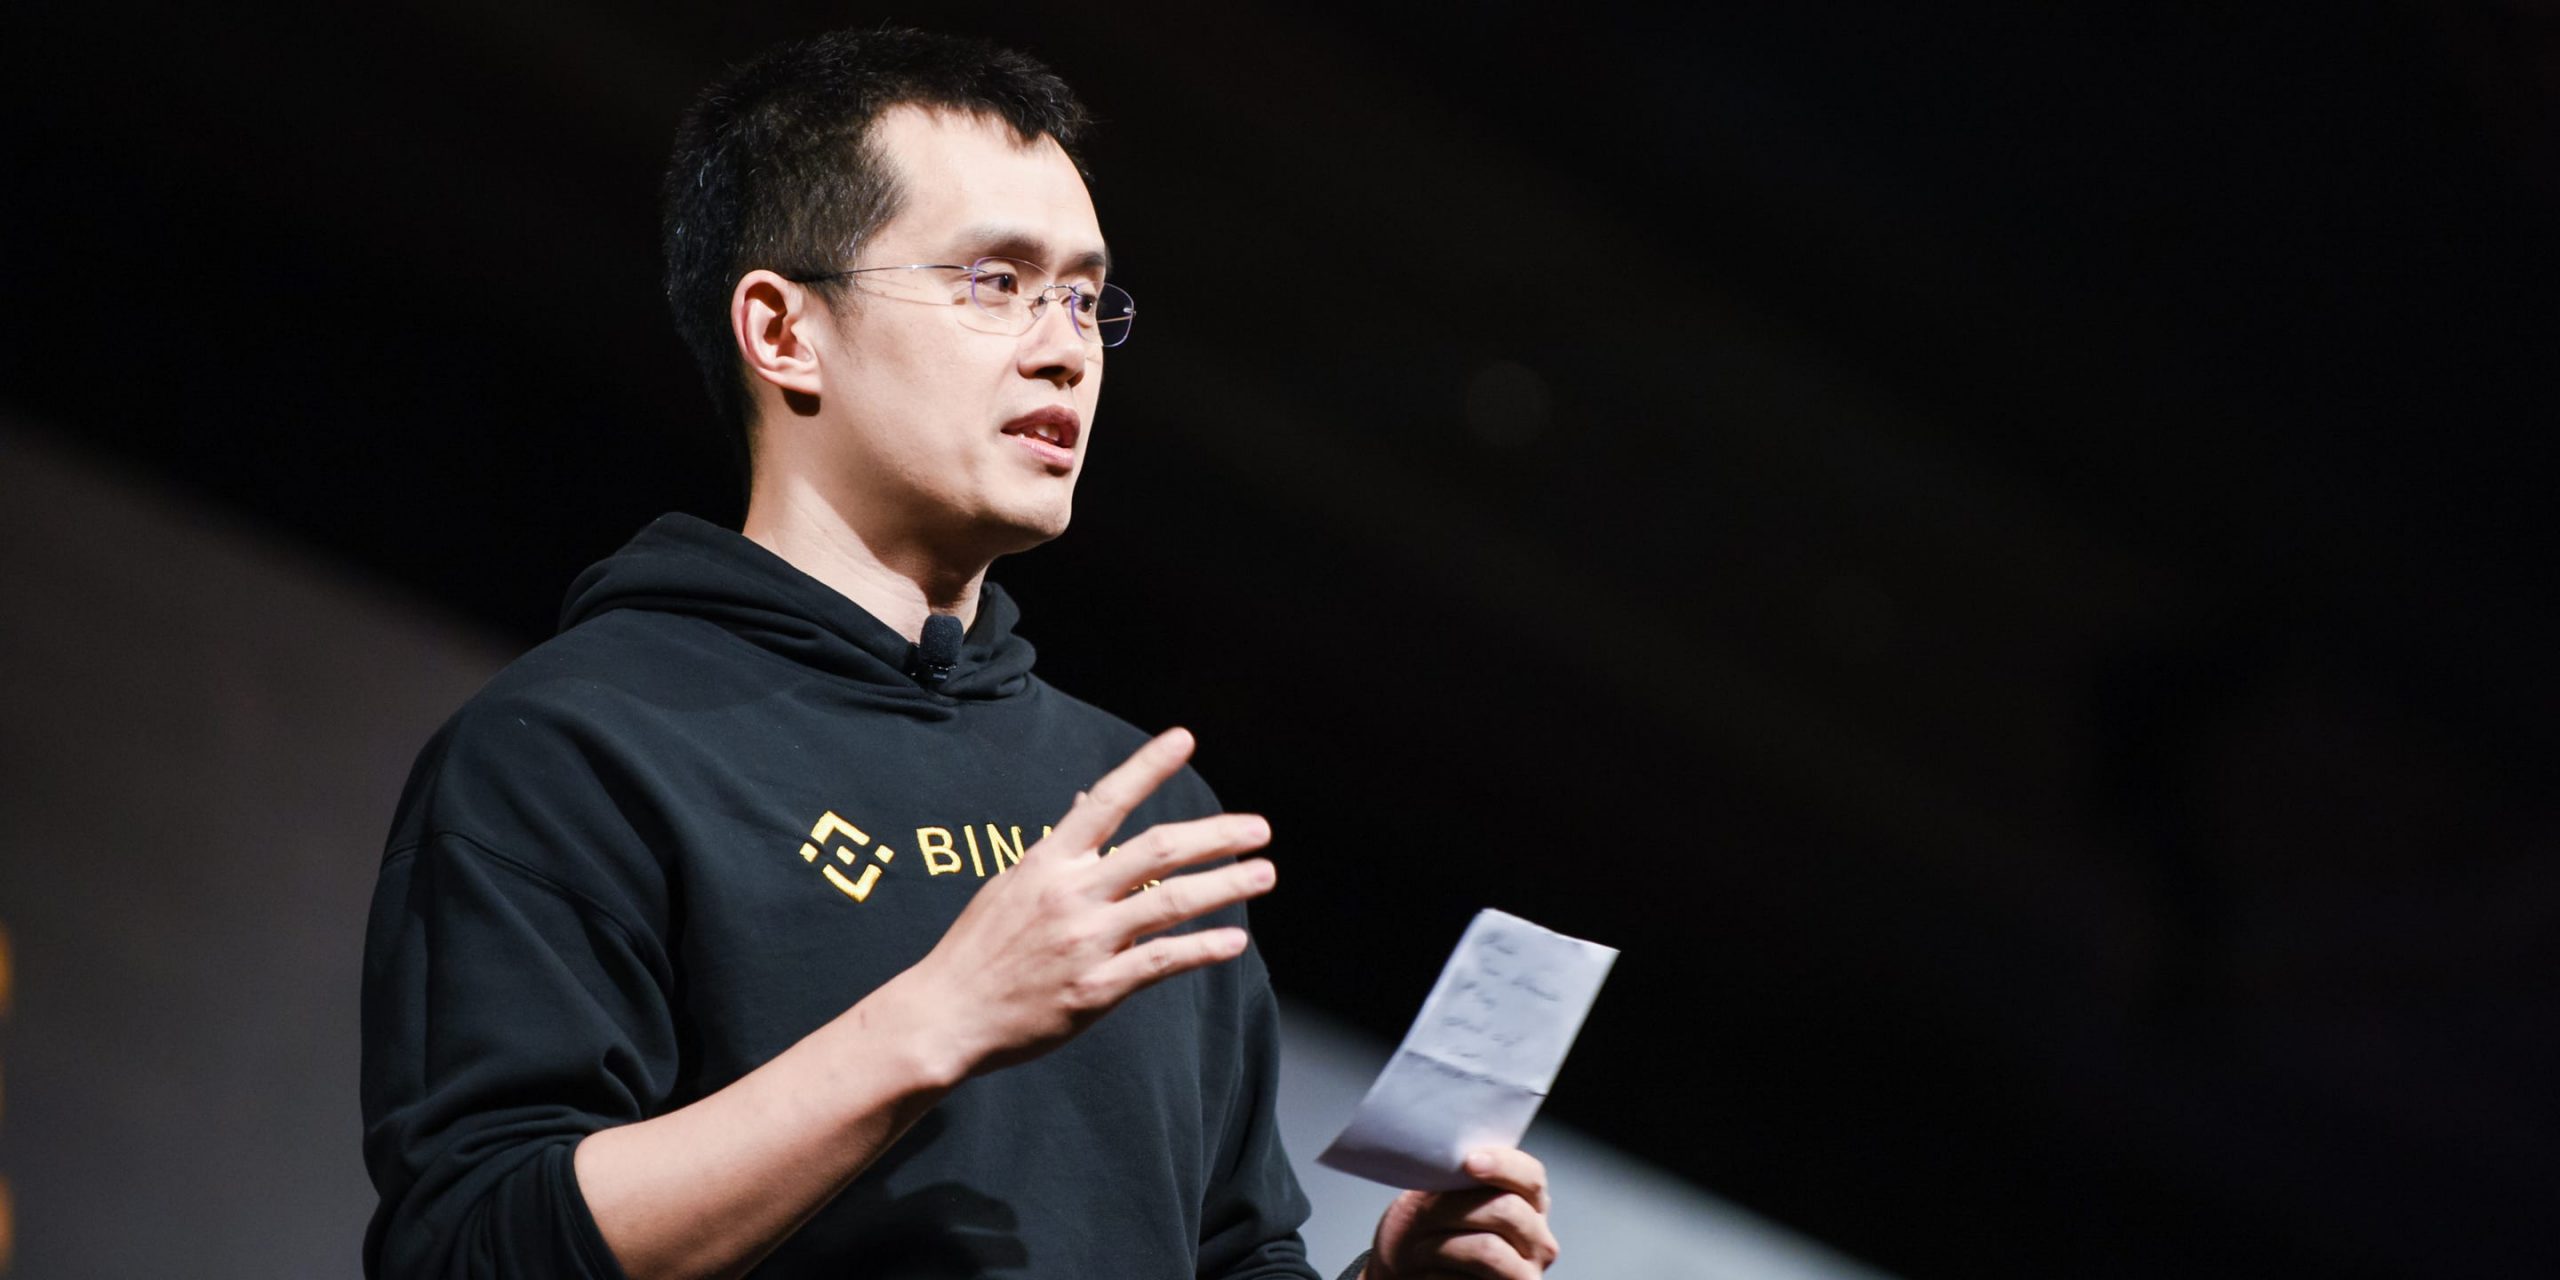 Chaopeng Zhang is the chief executive officer of Binance, the world's largest crypto exchange.